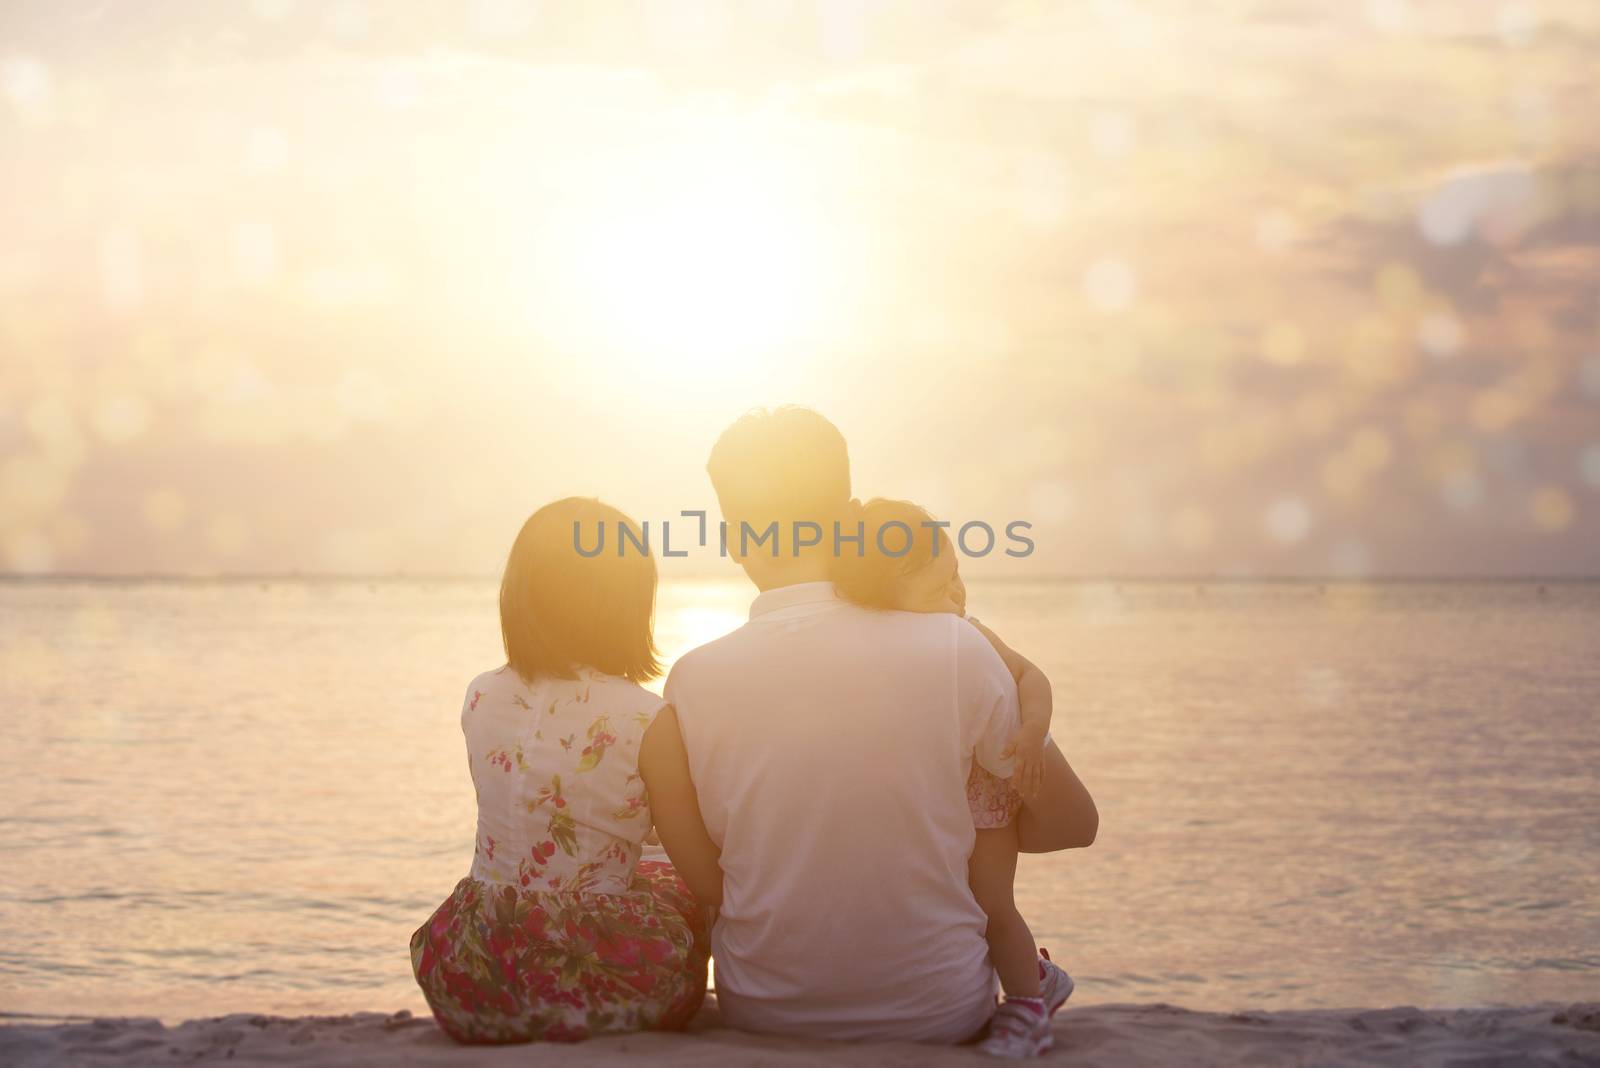 Rear view of family enjoying outdoor activity together, sitting on coastline in beautiful sunset during holiday vacations.